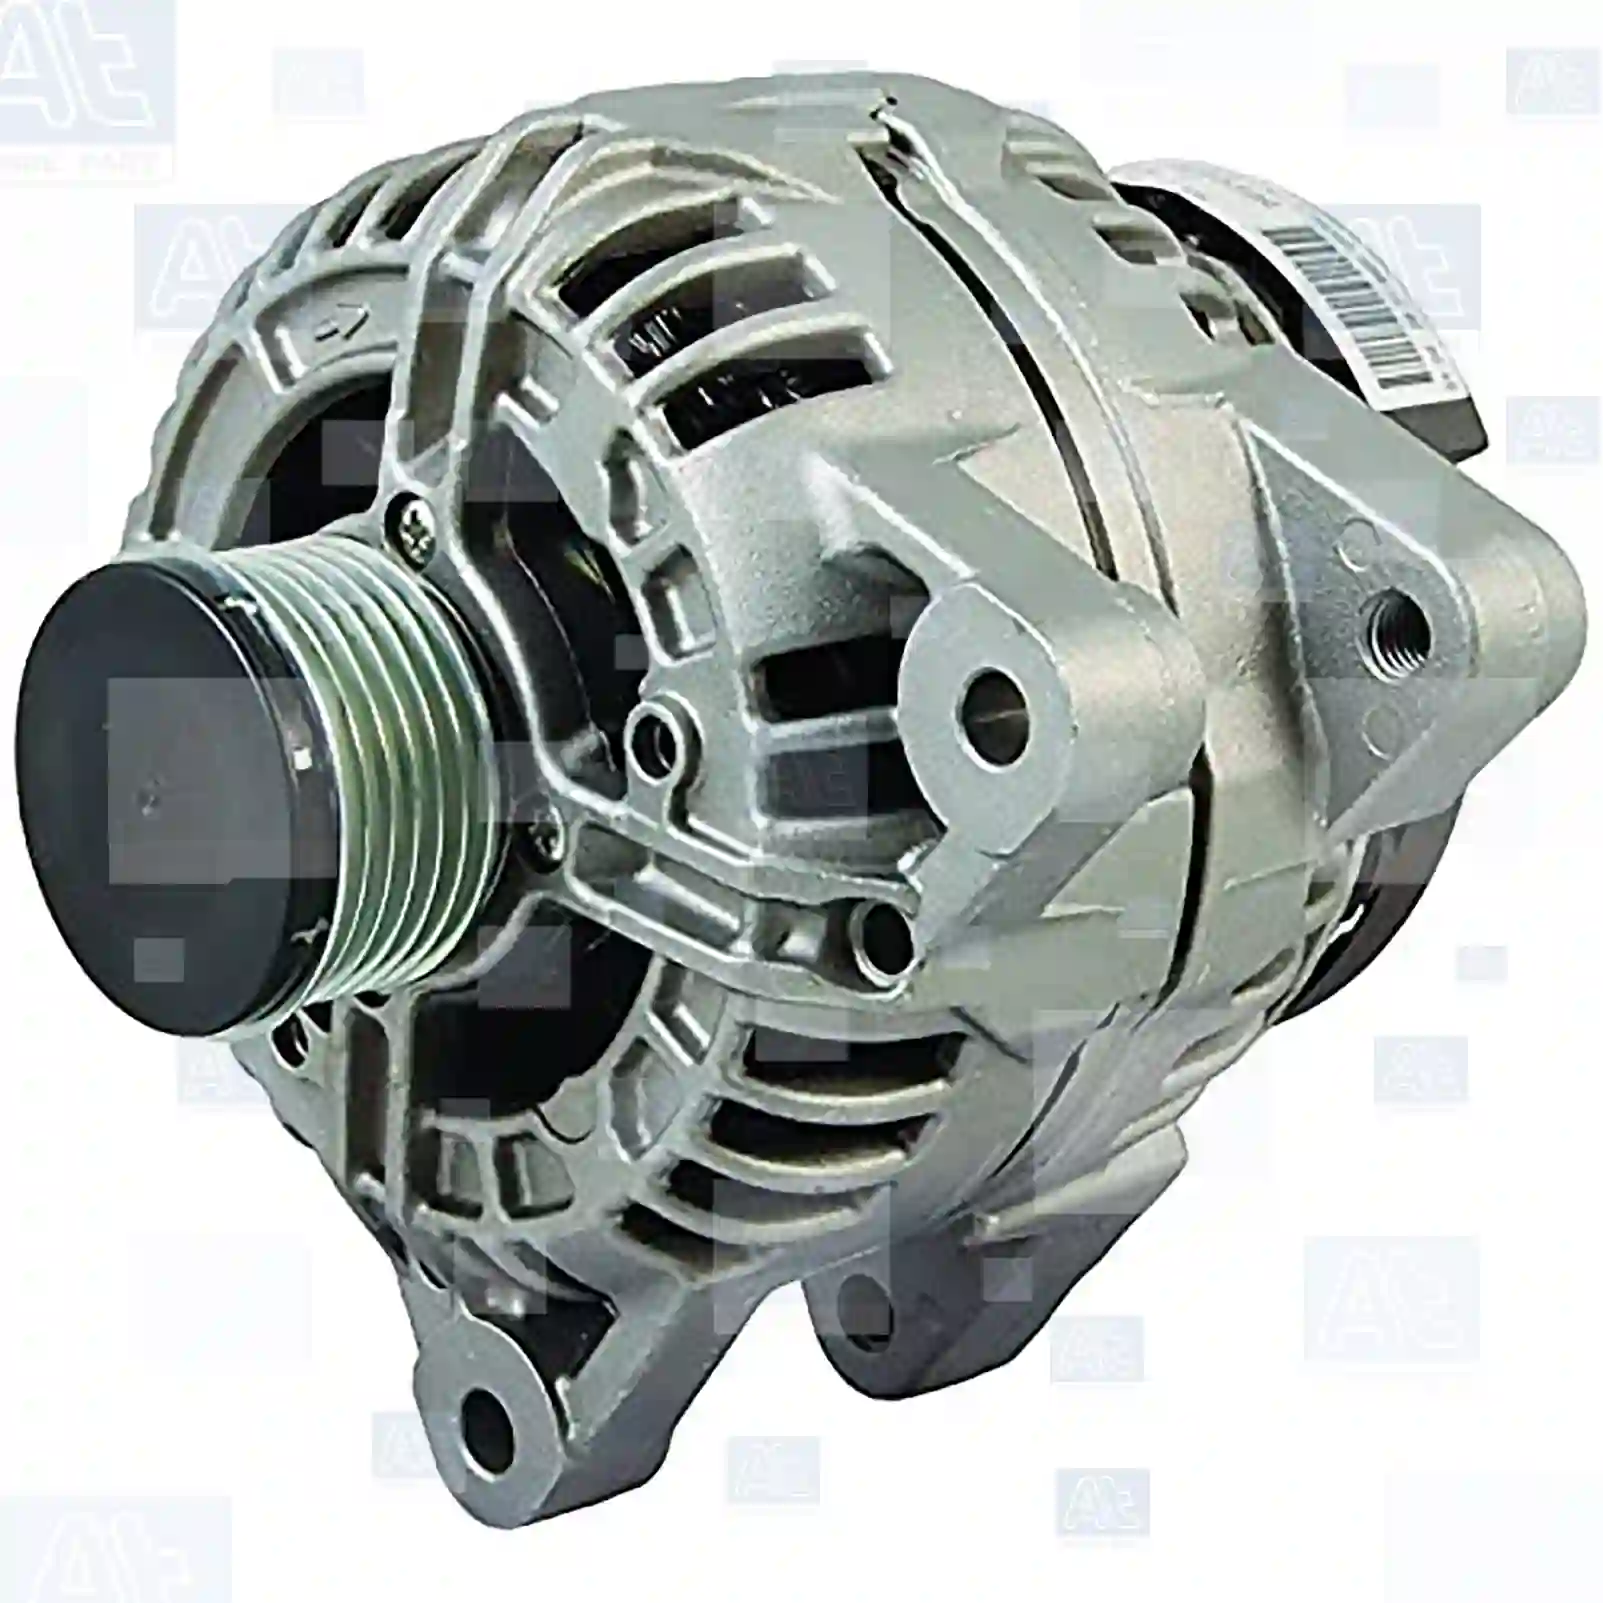 Alternator, 77711564, 7794970, 5702AG, 5702AR, 5702AS, 5702C2, 5702E0, 5702E1, 5702E2, 5702E3, 5702EX, 5702EY, 5702NH, 5705AG, 5705AR, 5705AS, 5705ES, 5705EX, 5705EY, 5705NH, 9644037180, 9644103580, 9646065480, 9646065488, 9646321780, 9646321880, 9650358580, 9665617780, 71732307, 71733552, 9646065480, 07794970, 71732307, 71733552, 71783849, 71784025, 71794294, 9644037180, 9644103580, 9646065480, 9646065488, 9646321780, 9646321880, 9650358580, 71732307, 71733552, 71783849, 71784025, 71794294, 9646065480, 5702AG, 5702AR, 5702AS, 5702C2, 5702E0, 5702E1, 5702E2, 5702E3, 5702EX, 5702EY, 5702NH, 5705AG, 5705AR, 5705AS, 5705ES, 5705EX, 5705EY, 5705NH, 9644037180, 9644103580, 9646065480, 9646065488, 9646321780, 9646321880, 9650358580, 9665617780, 31400-69K00, 31400-69K00-000 ||  77711564 At Spare Part | Engine, Accelerator Pedal, Camshaft, Connecting Rod, Crankcase, Crankshaft, Cylinder Head, Engine Suspension Mountings, Exhaust Manifold, Exhaust Gas Recirculation, Filter Kits, Flywheel Housing, General Overhaul Kits, Engine, Intake Manifold, Oil Cleaner, Oil Cooler, Oil Filter, Oil Pump, Oil Sump, Piston & Liner, Sensor & Switch, Timing Case, Turbocharger, Cooling System, Belt Tensioner, Coolant Filter, Coolant Pipe, Corrosion Prevention Agent, Drive, Expansion Tank, Fan, Intercooler, Monitors & Gauges, Radiator, Thermostat, V-Belt / Timing belt, Water Pump, Fuel System, Electronical Injector Unit, Feed Pump, Fuel Filter, cpl., Fuel Gauge Sender,  Fuel Line, Fuel Pump, Fuel Tank, Injection Line Kit, Injection Pump, Exhaust System, Clutch & Pedal, Gearbox, Propeller Shaft, Axles, Brake System, Hubs & Wheels, Suspension, Leaf Spring, Universal Parts / Accessories, Steering, Electrical System, Cabin Alternator, 77711564, 7794970, 5702AG, 5702AR, 5702AS, 5702C2, 5702E0, 5702E1, 5702E2, 5702E3, 5702EX, 5702EY, 5702NH, 5705AG, 5705AR, 5705AS, 5705ES, 5705EX, 5705EY, 5705NH, 9644037180, 9644103580, 9646065480, 9646065488, 9646321780, 9646321880, 9650358580, 9665617780, 71732307, 71733552, 9646065480, 07794970, 71732307, 71733552, 71783849, 71784025, 71794294, 9644037180, 9644103580, 9646065480, 9646065488, 9646321780, 9646321880, 9650358580, 71732307, 71733552, 71783849, 71784025, 71794294, 9646065480, 5702AG, 5702AR, 5702AS, 5702C2, 5702E0, 5702E1, 5702E2, 5702E3, 5702EX, 5702EY, 5702NH, 5705AG, 5705AR, 5705AS, 5705ES, 5705EX, 5705EY, 5705NH, 9644037180, 9644103580, 9646065480, 9646065488, 9646321780, 9646321880, 9650358580, 9665617780, 31400-69K00, 31400-69K00-000 ||  77711564 At Spare Part | Engine, Accelerator Pedal, Camshaft, Connecting Rod, Crankcase, Crankshaft, Cylinder Head, Engine Suspension Mountings, Exhaust Manifold, Exhaust Gas Recirculation, Filter Kits, Flywheel Housing, General Overhaul Kits, Engine, Intake Manifold, Oil Cleaner, Oil Cooler, Oil Filter, Oil Pump, Oil Sump, Piston & Liner, Sensor & Switch, Timing Case, Turbocharger, Cooling System, Belt Tensioner, Coolant Filter, Coolant Pipe, Corrosion Prevention Agent, Drive, Expansion Tank, Fan, Intercooler, Monitors & Gauges, Radiator, Thermostat, V-Belt / Timing belt, Water Pump, Fuel System, Electronical Injector Unit, Feed Pump, Fuel Filter, cpl., Fuel Gauge Sender,  Fuel Line, Fuel Pump, Fuel Tank, Injection Line Kit, Injection Pump, Exhaust System, Clutch & Pedal, Gearbox, Propeller Shaft, Axles, Brake System, Hubs & Wheels, Suspension, Leaf Spring, Universal Parts / Accessories, Steering, Electrical System, Cabin